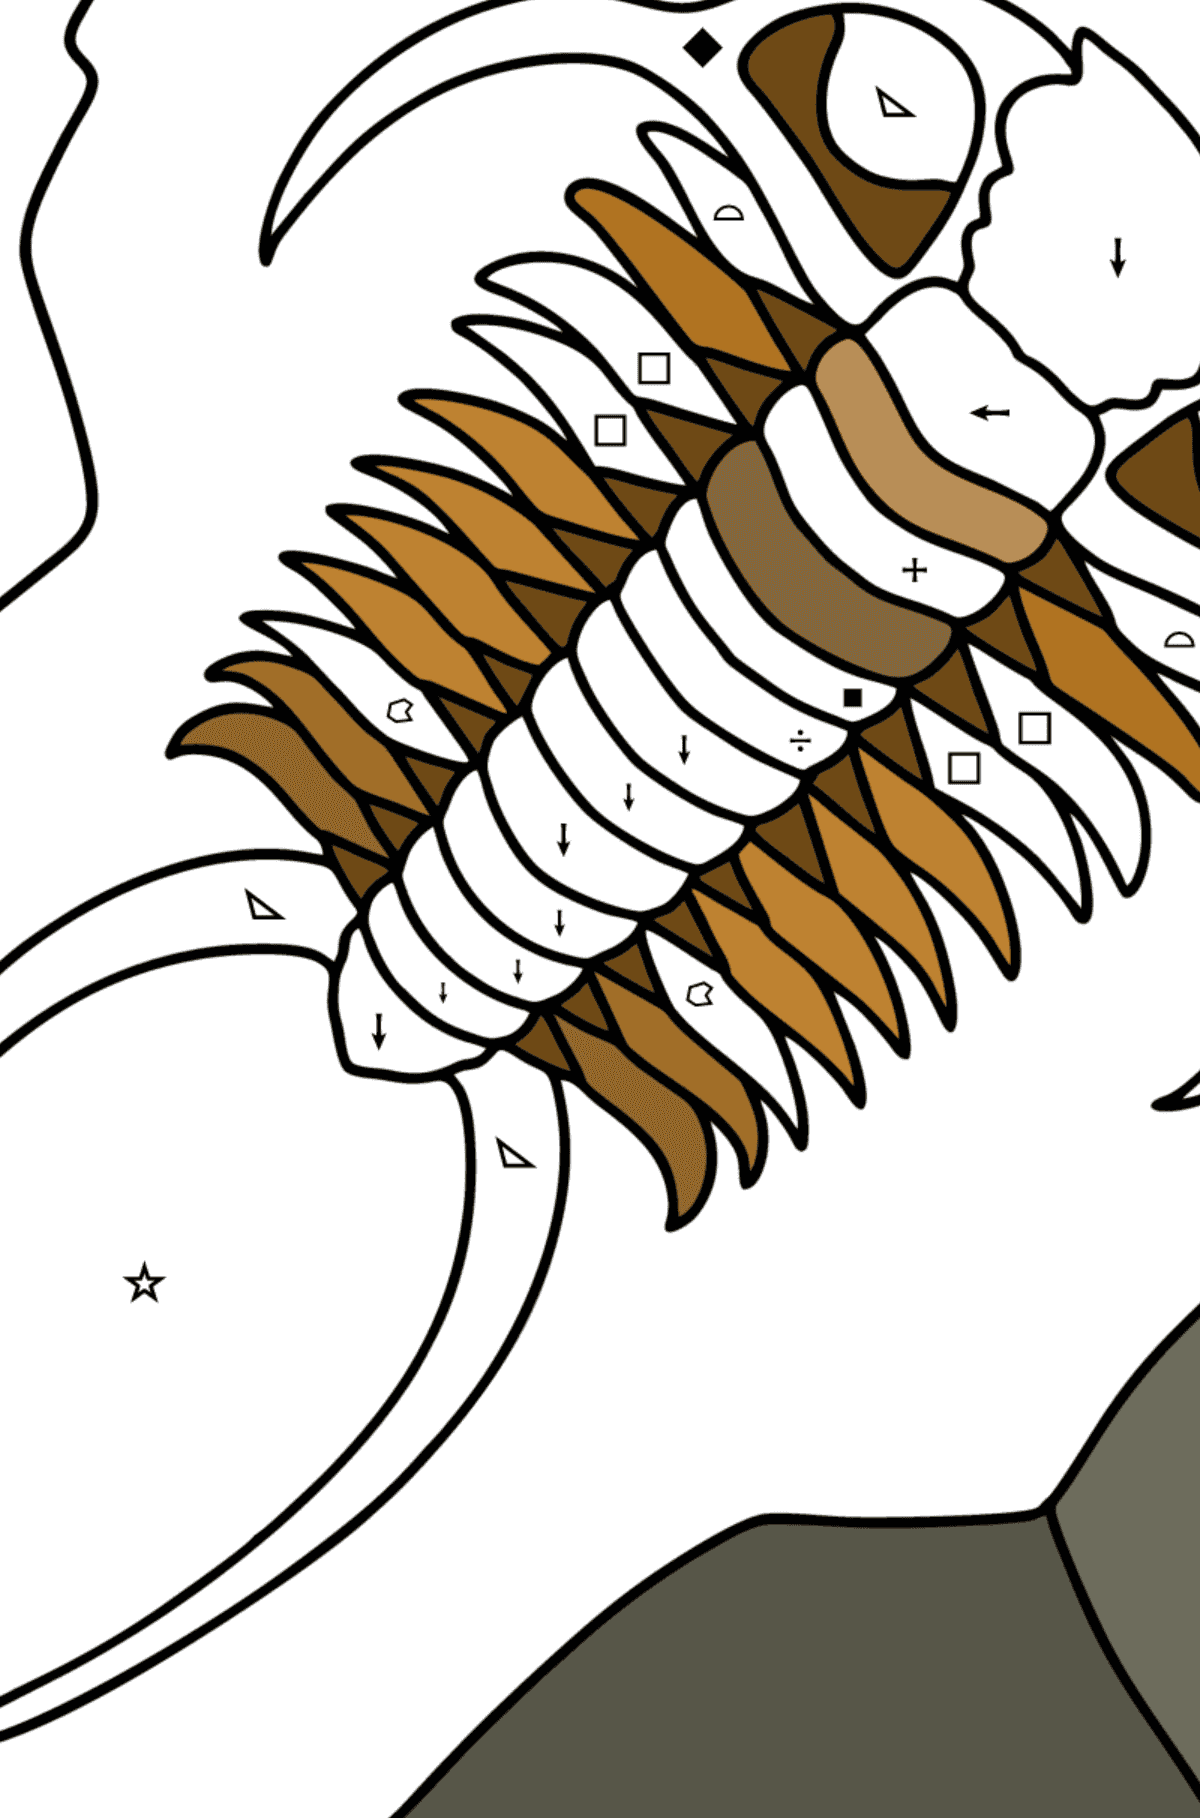 Sea Fossil coloring page - Coloring by Symbols and Geometric Shapes for Kids